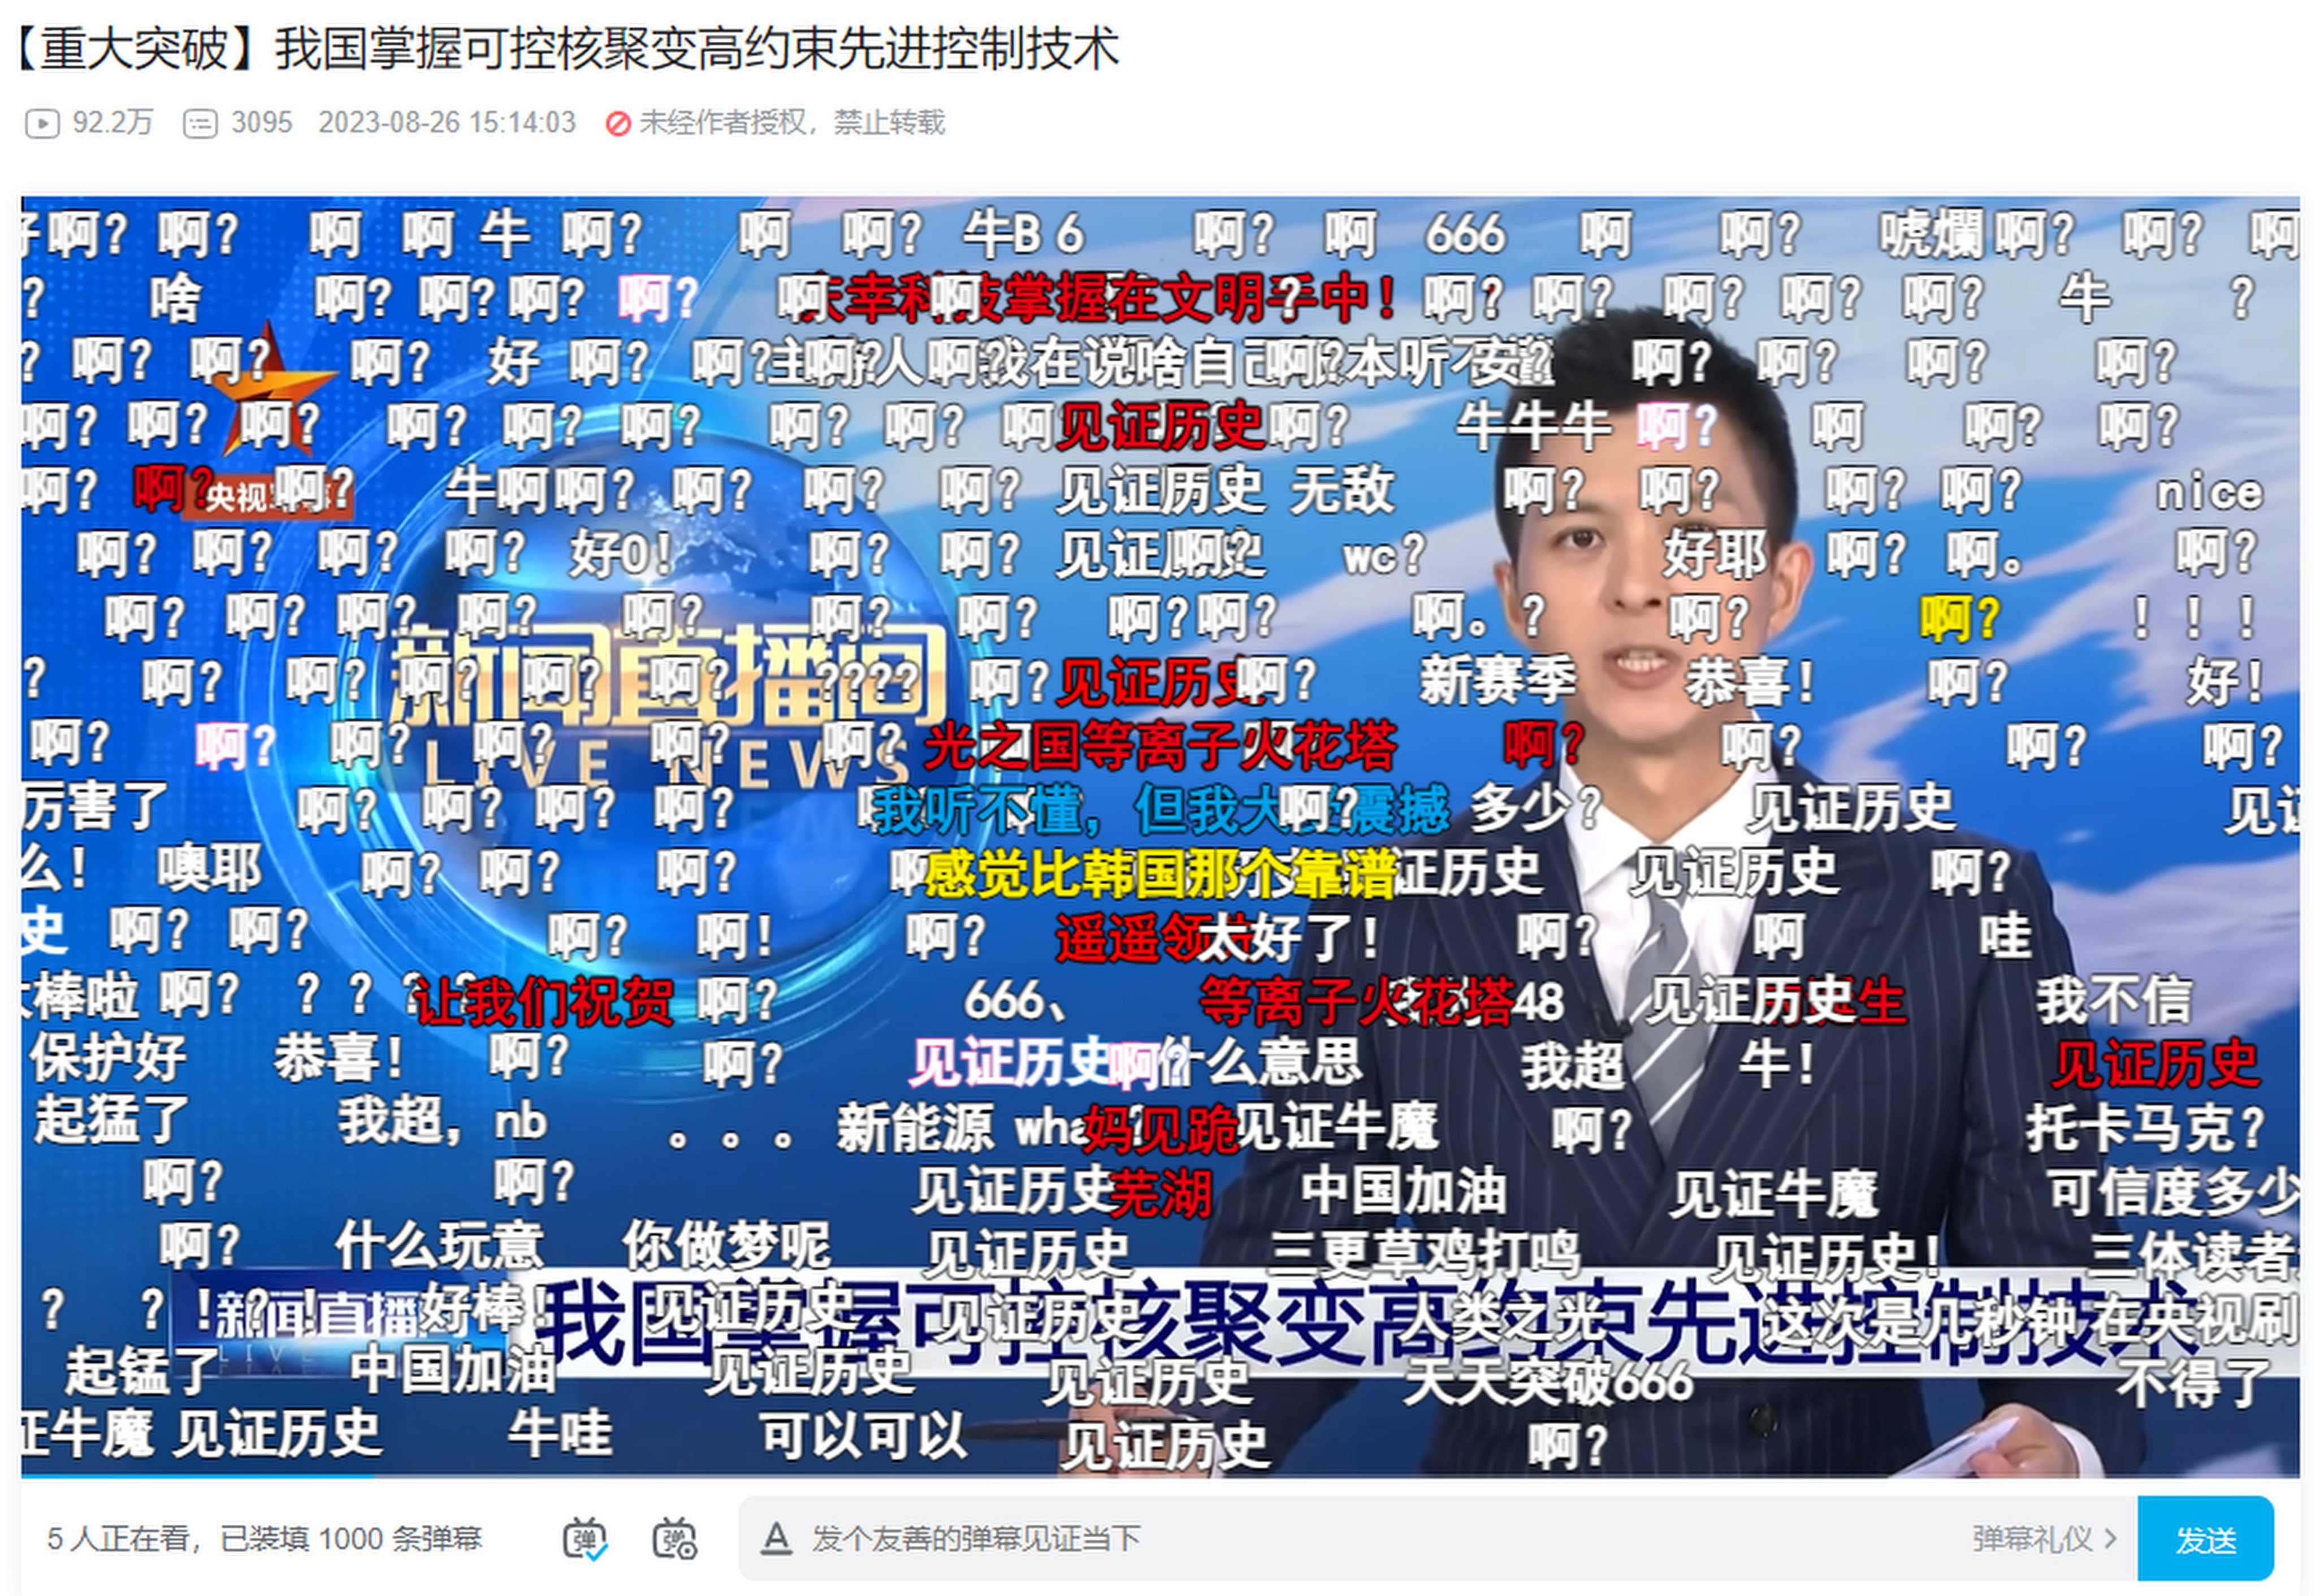 The word “ah?” streaming across a video, published on Bilibili in August, about China’s development in nuclear fusion technology. Photo: Handout